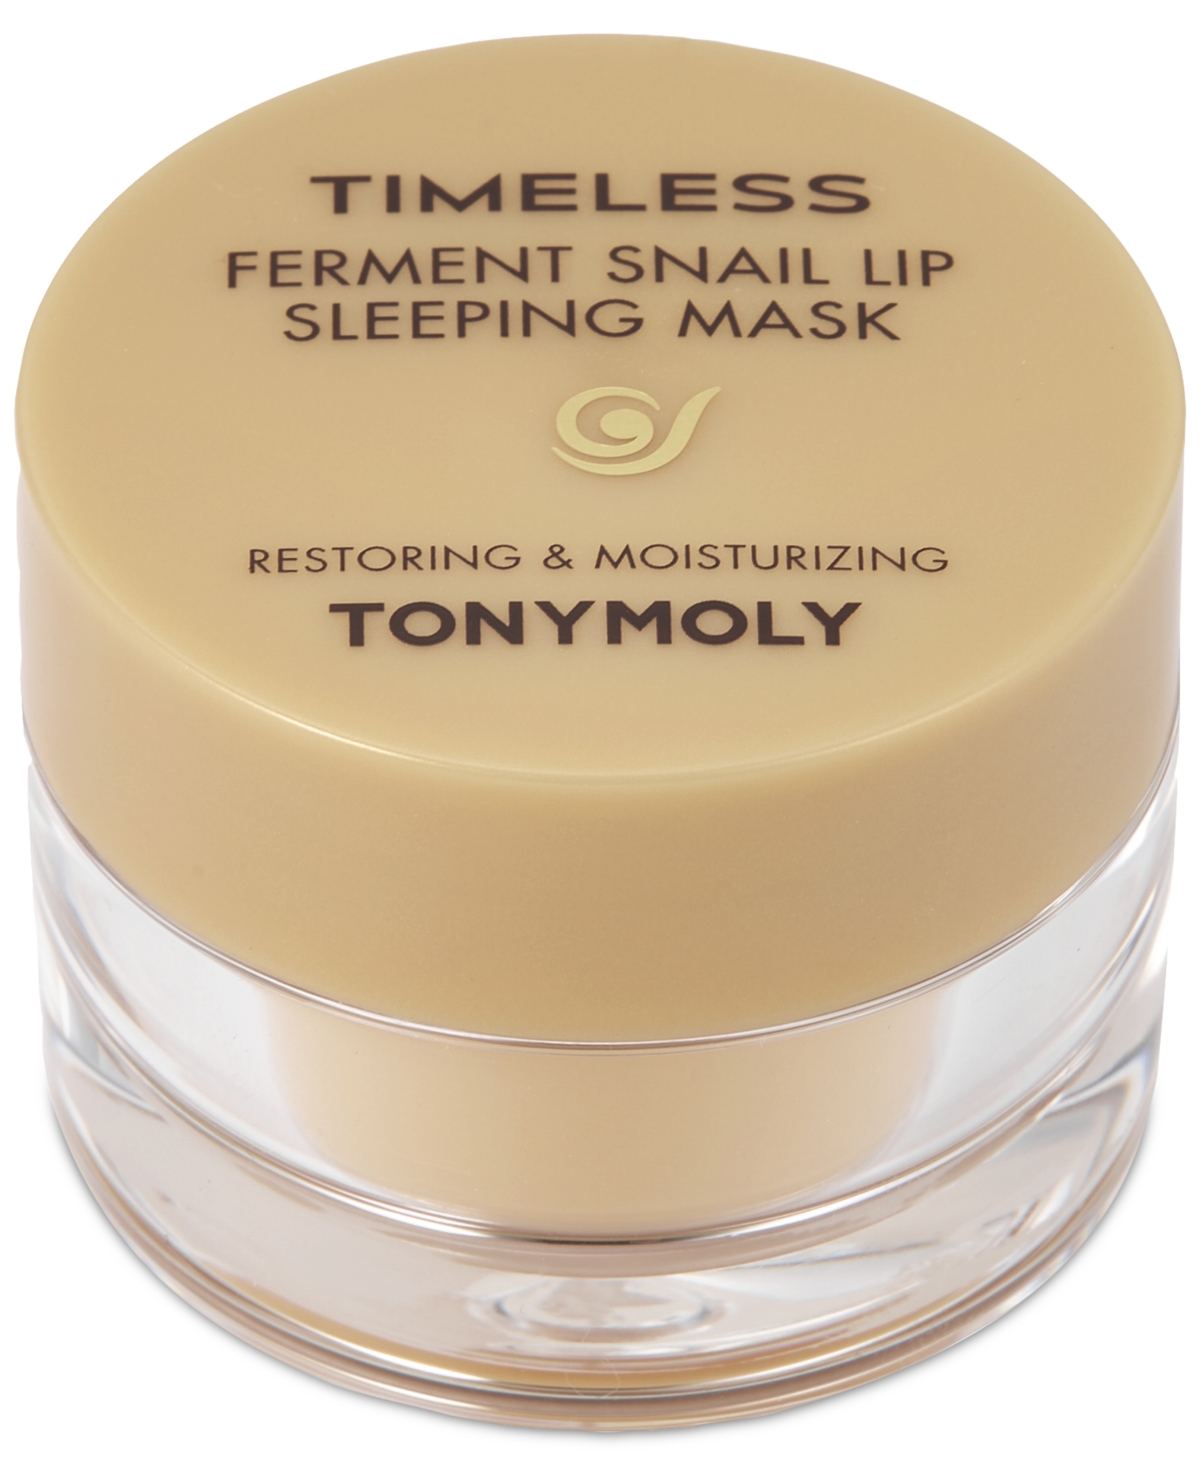 Tonymoly Timeless Ferment Snail Lip Sleeping Mask In No Color